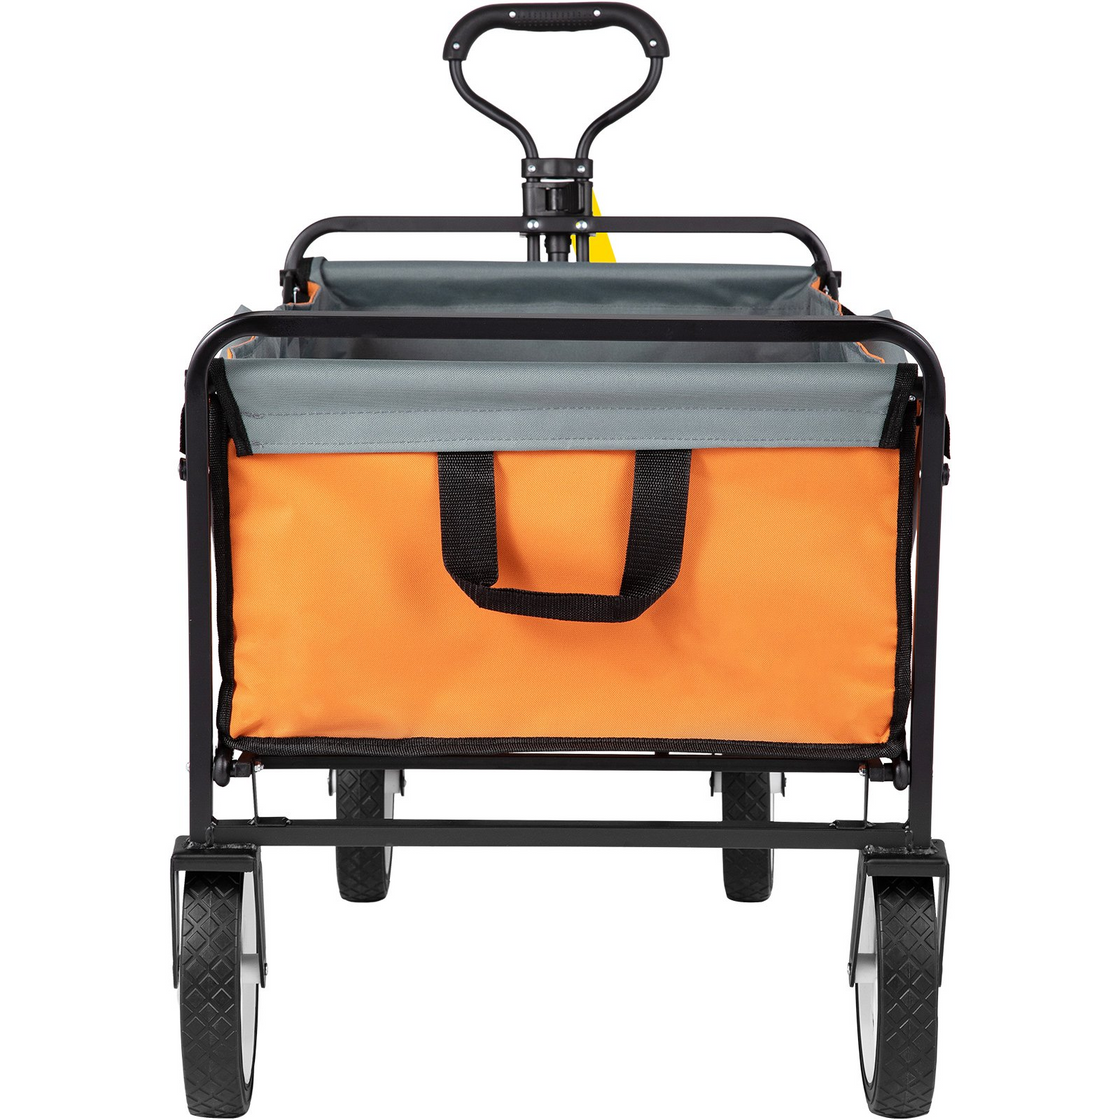 VEVOR Wagon Cart - Collapsible Folding Garden Cart with 176lbs Load